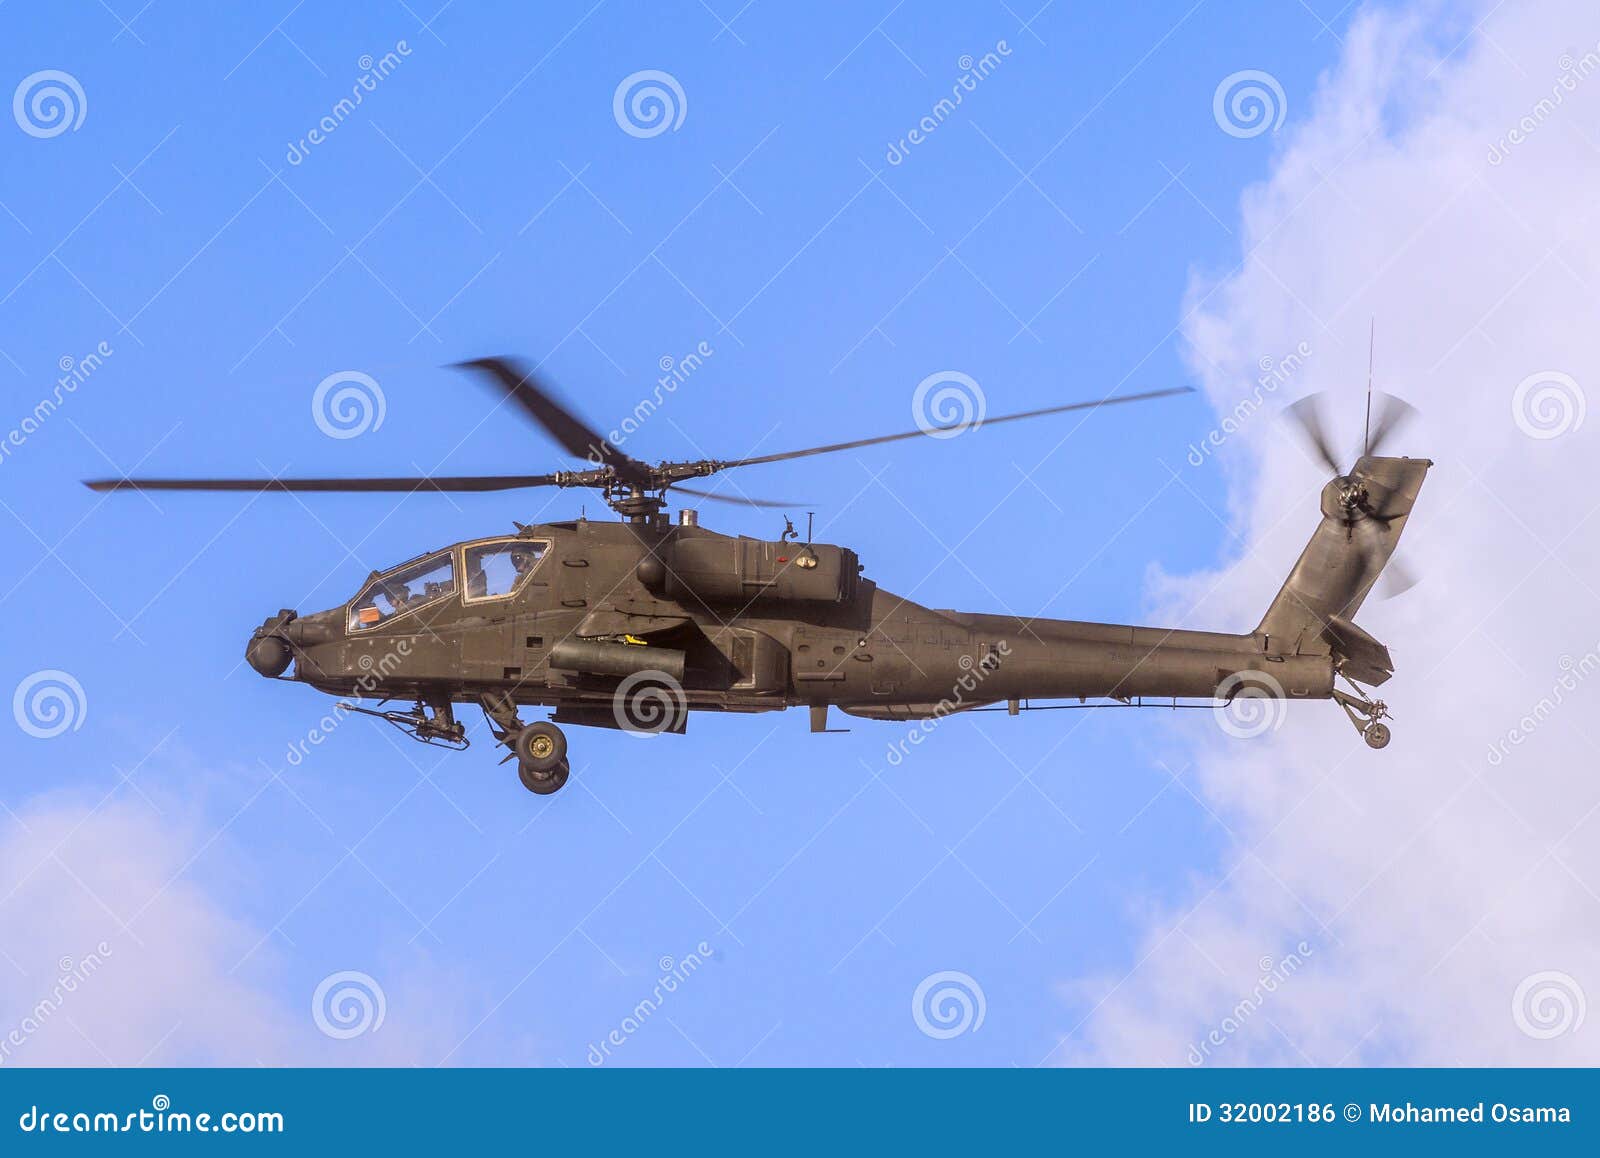 apache helicopter in flight